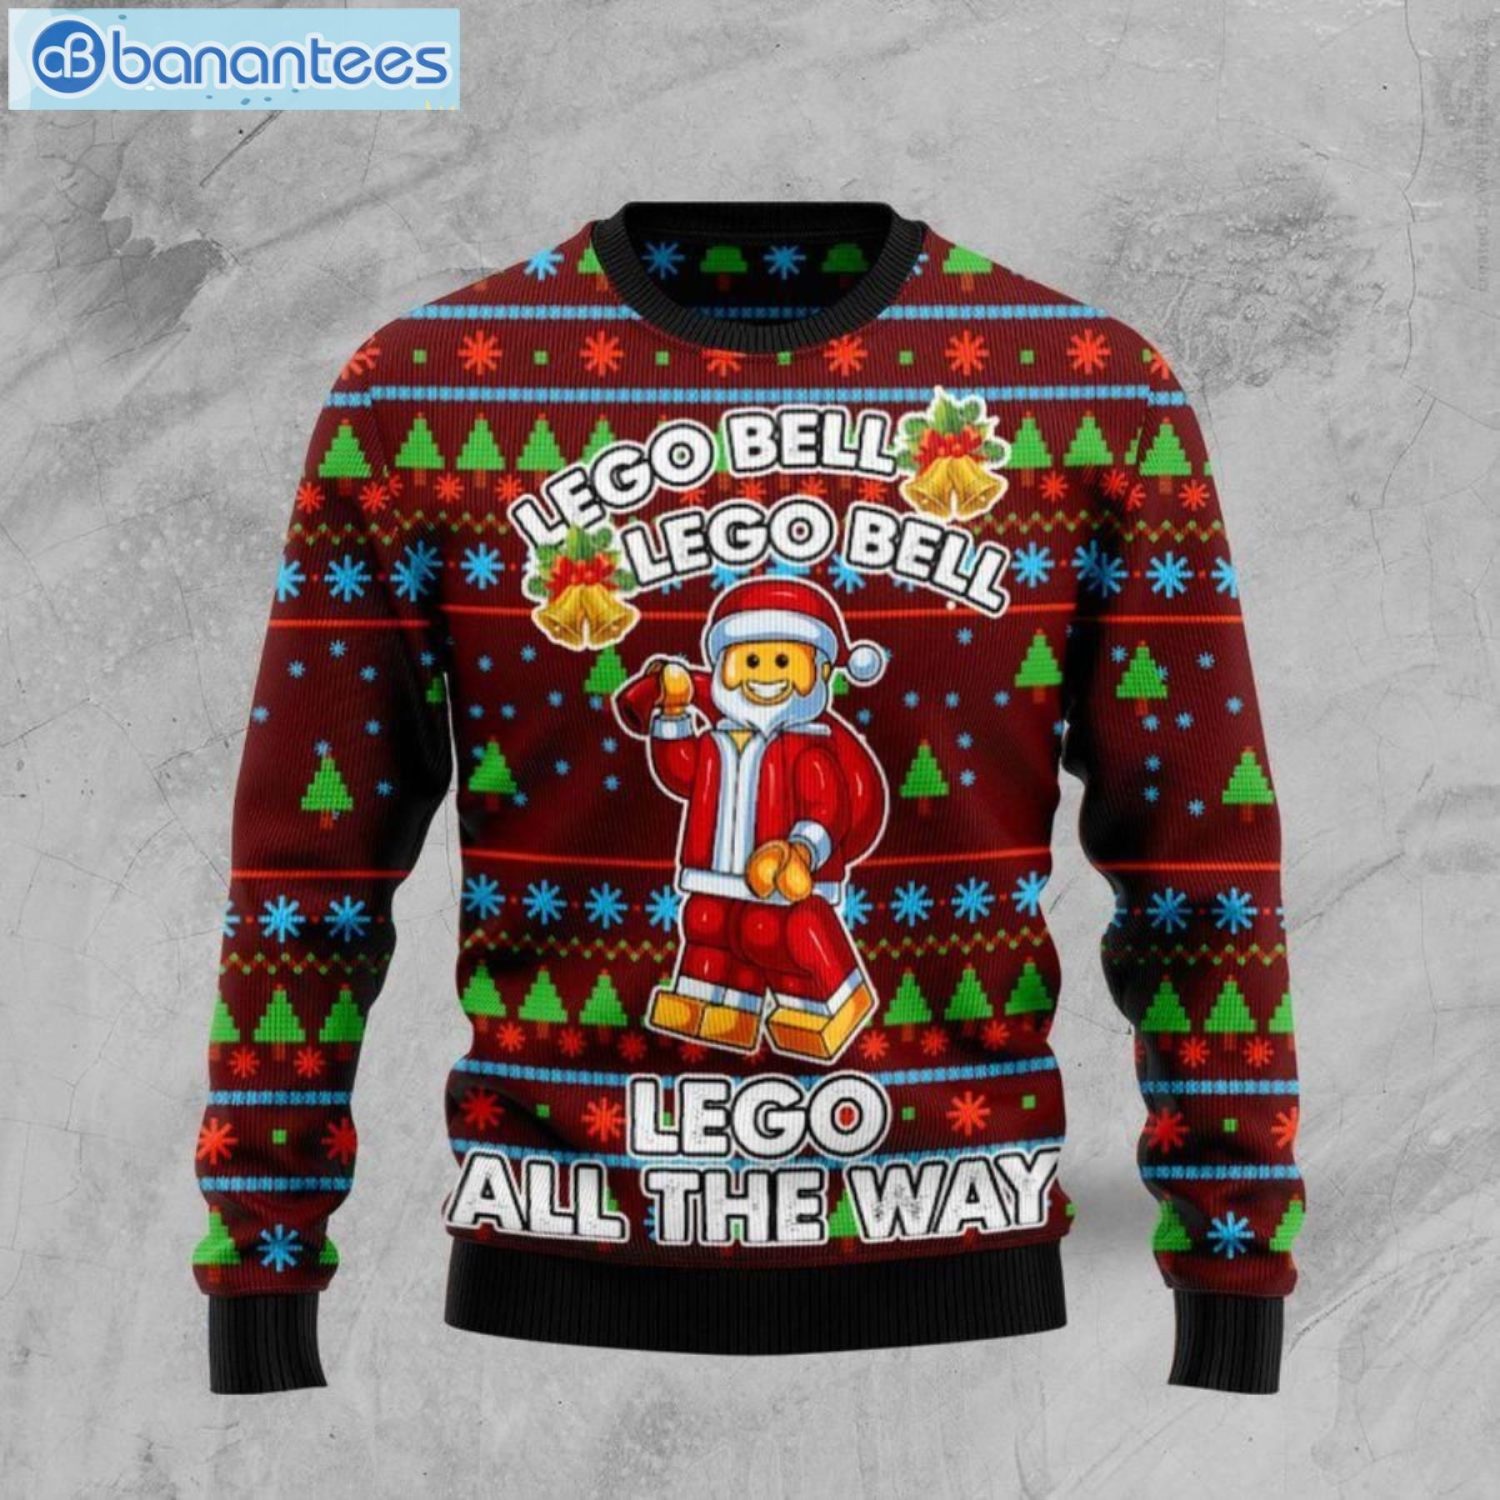 Lego Bell Lego All The Way Christmas Ugly Sweater Product Photo 1 Product photo 1